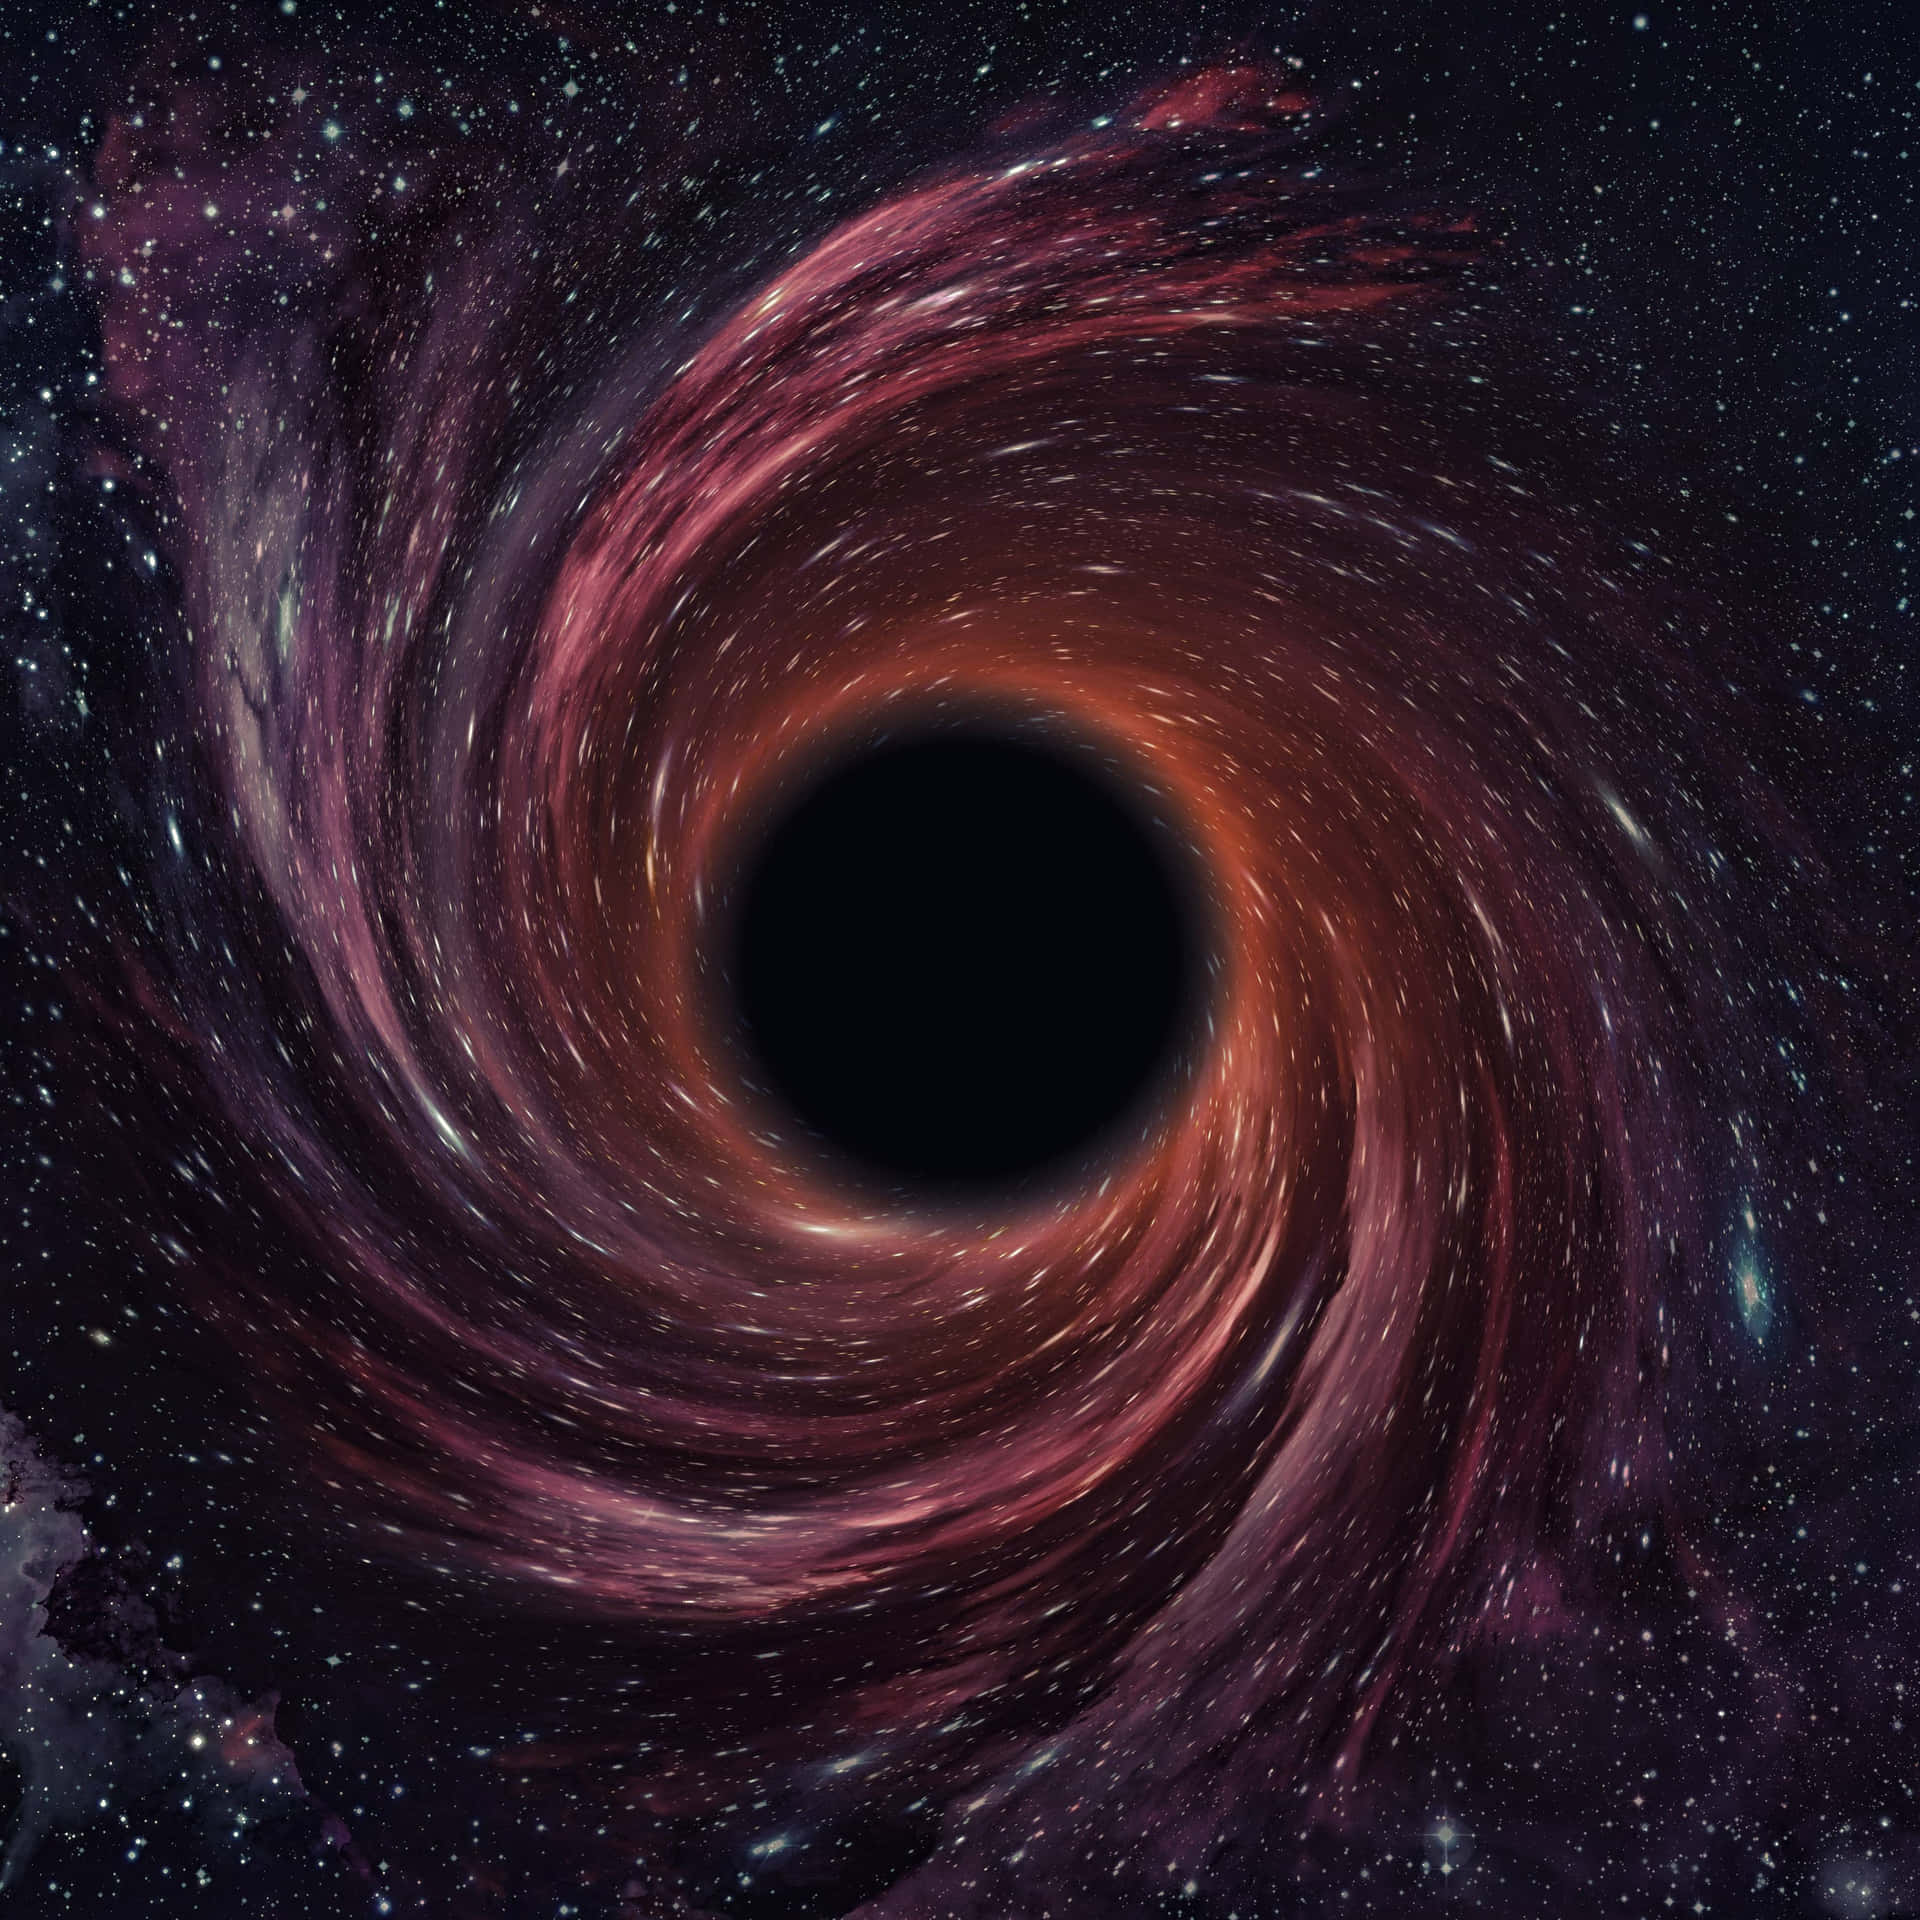 Amazing view of a Black Hole captured by the Hubble Telescope